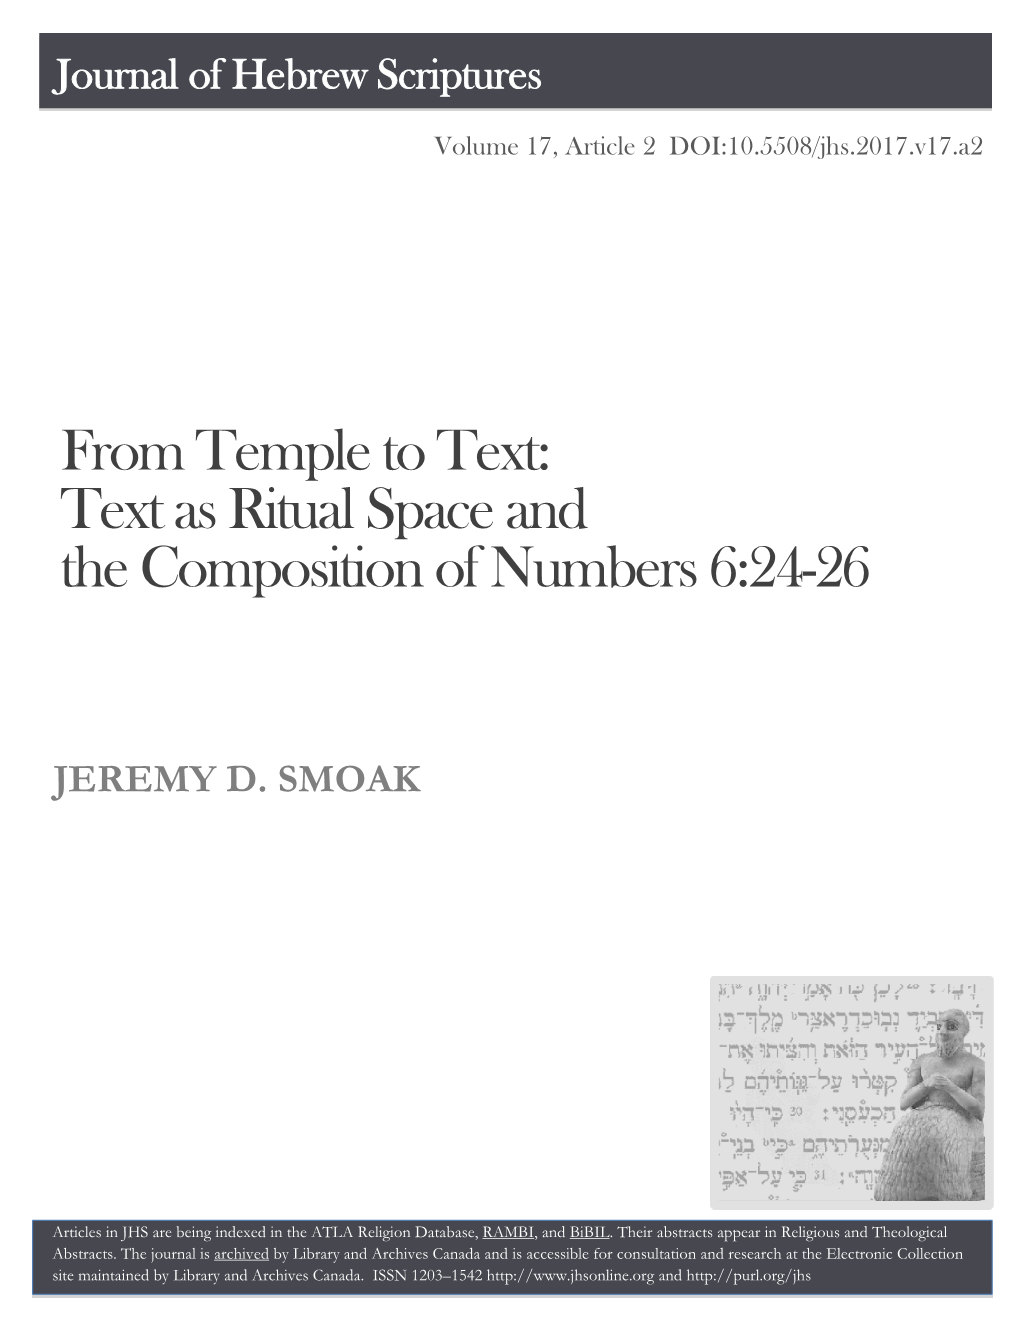 From Temple to Text: Text As Ritual Space and the Composition of Numbers 6:24-26